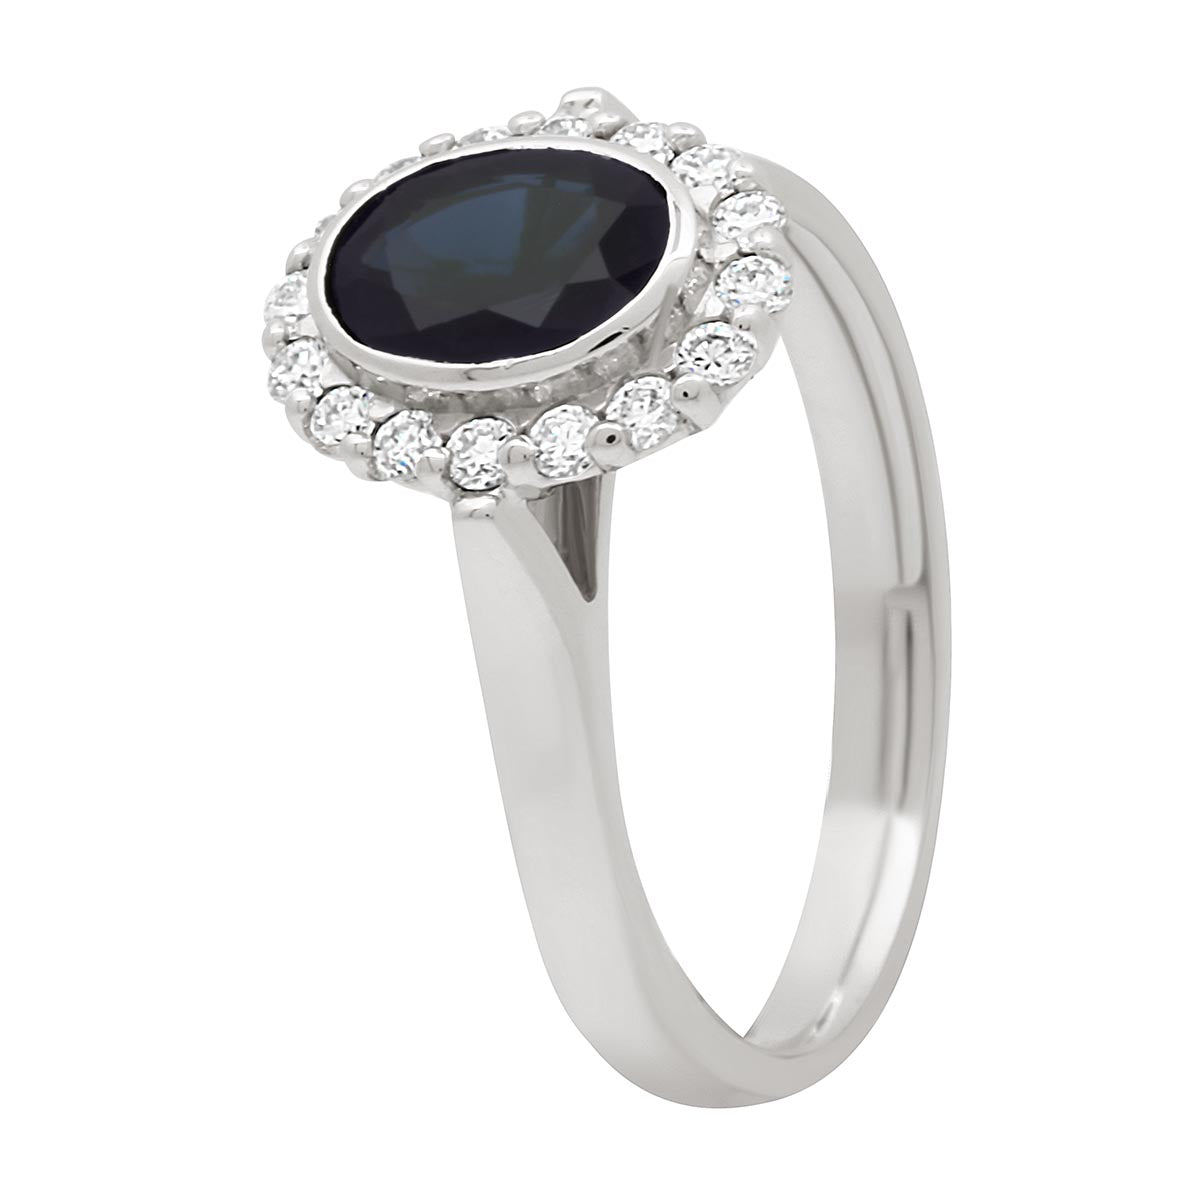 Sapphire Bezel Engagement Ring in white gold standing at an angle